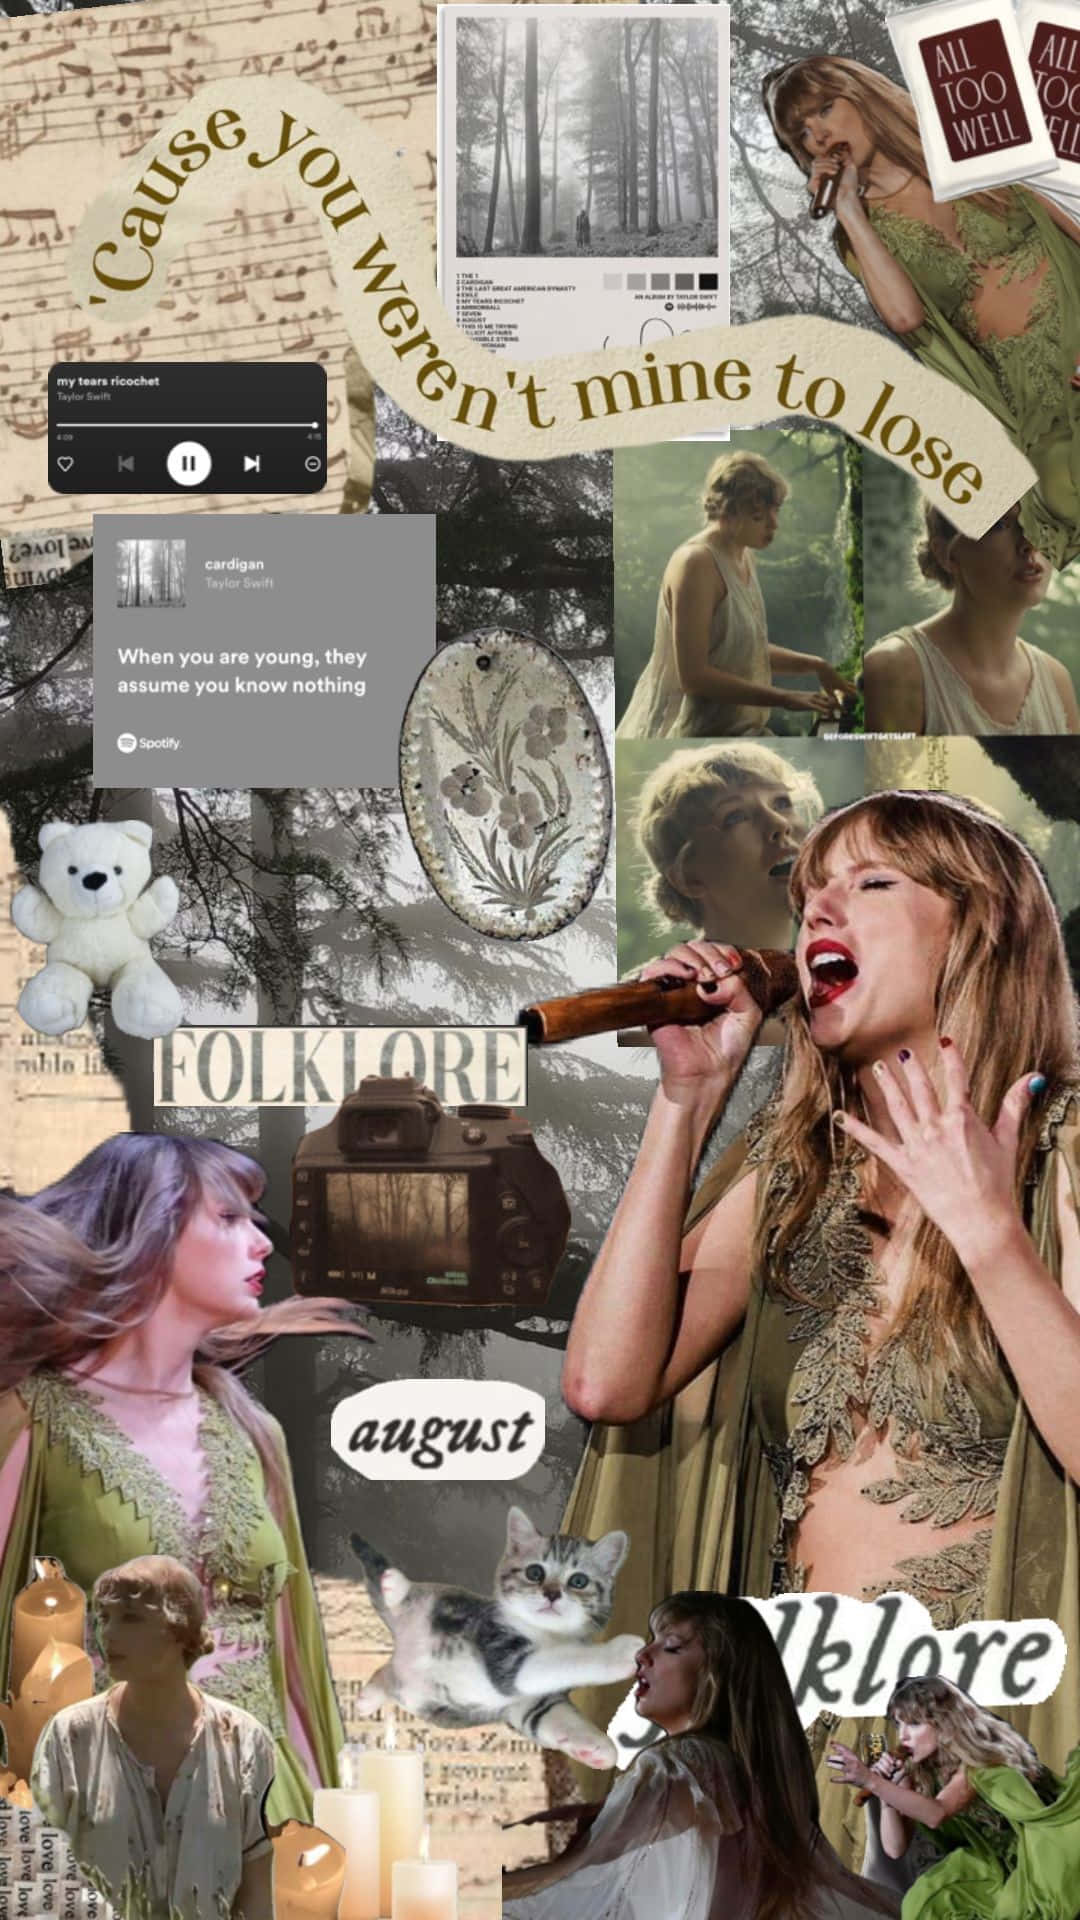 Taylor Swift Folklore Collage Wallpaper